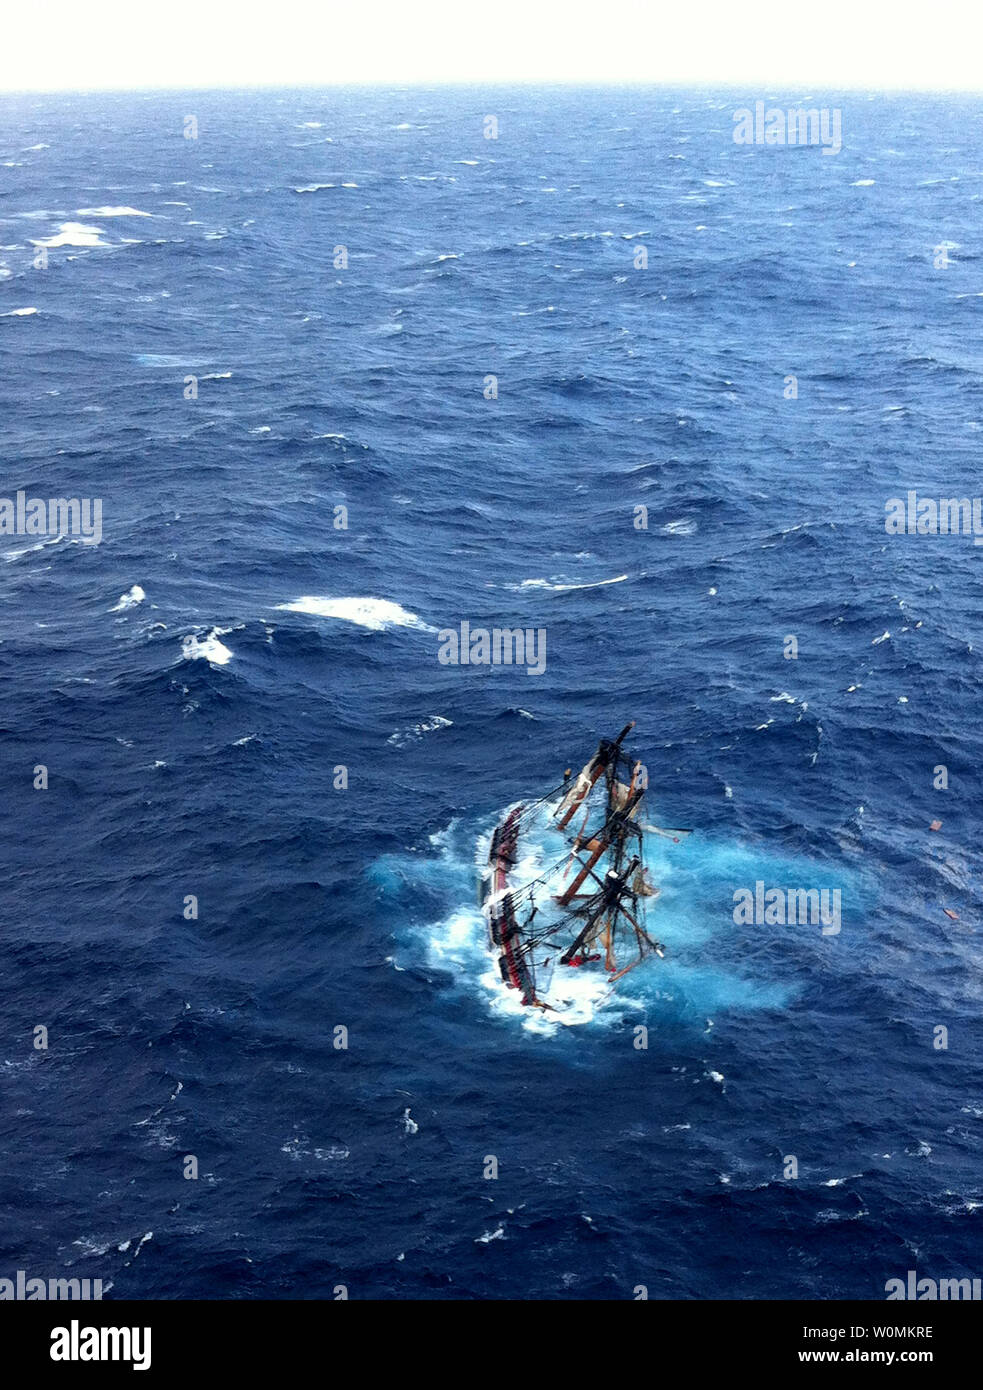 The HMS Bounty, a 180-foot sailboat, is shown submerged in the Atlantic Ocean during Hurricane Sandy approximately 90 miles southeast of Hatteras, N.C., Monday, October 29, 2012. Of the 16-person crew, the Coast Guard rescued 14, recovered one body and is searching for the captain of the vessel.   UPI/Tim Kuklewski/Coast Guard Stock Photo